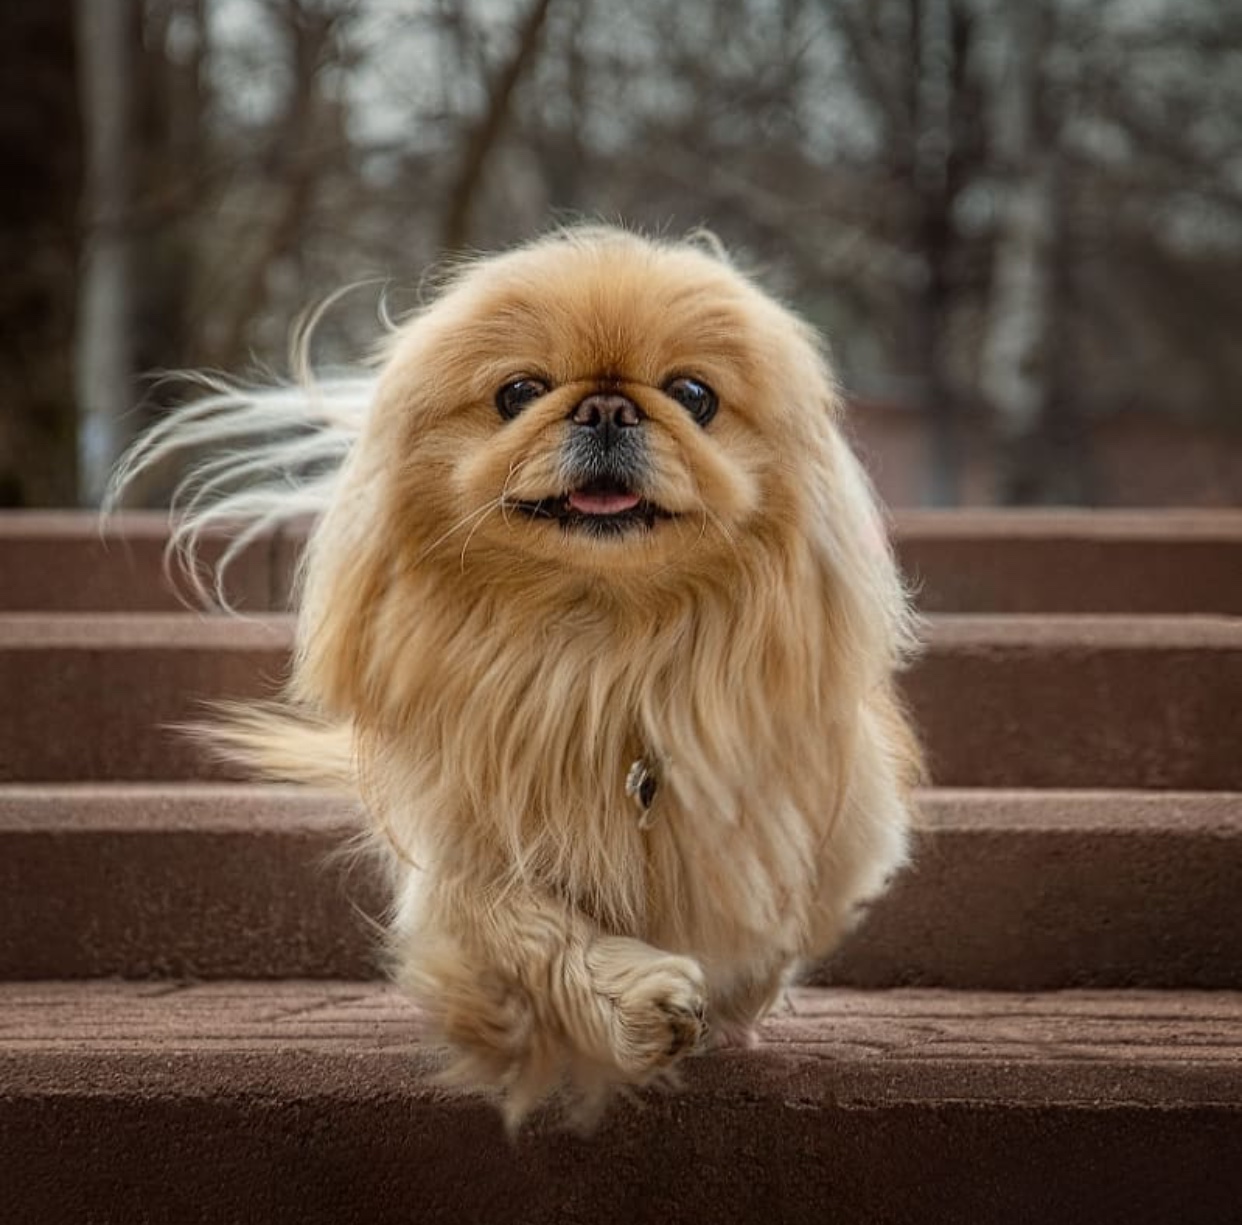 A Pekingese walking in the stairway at the park while smiling